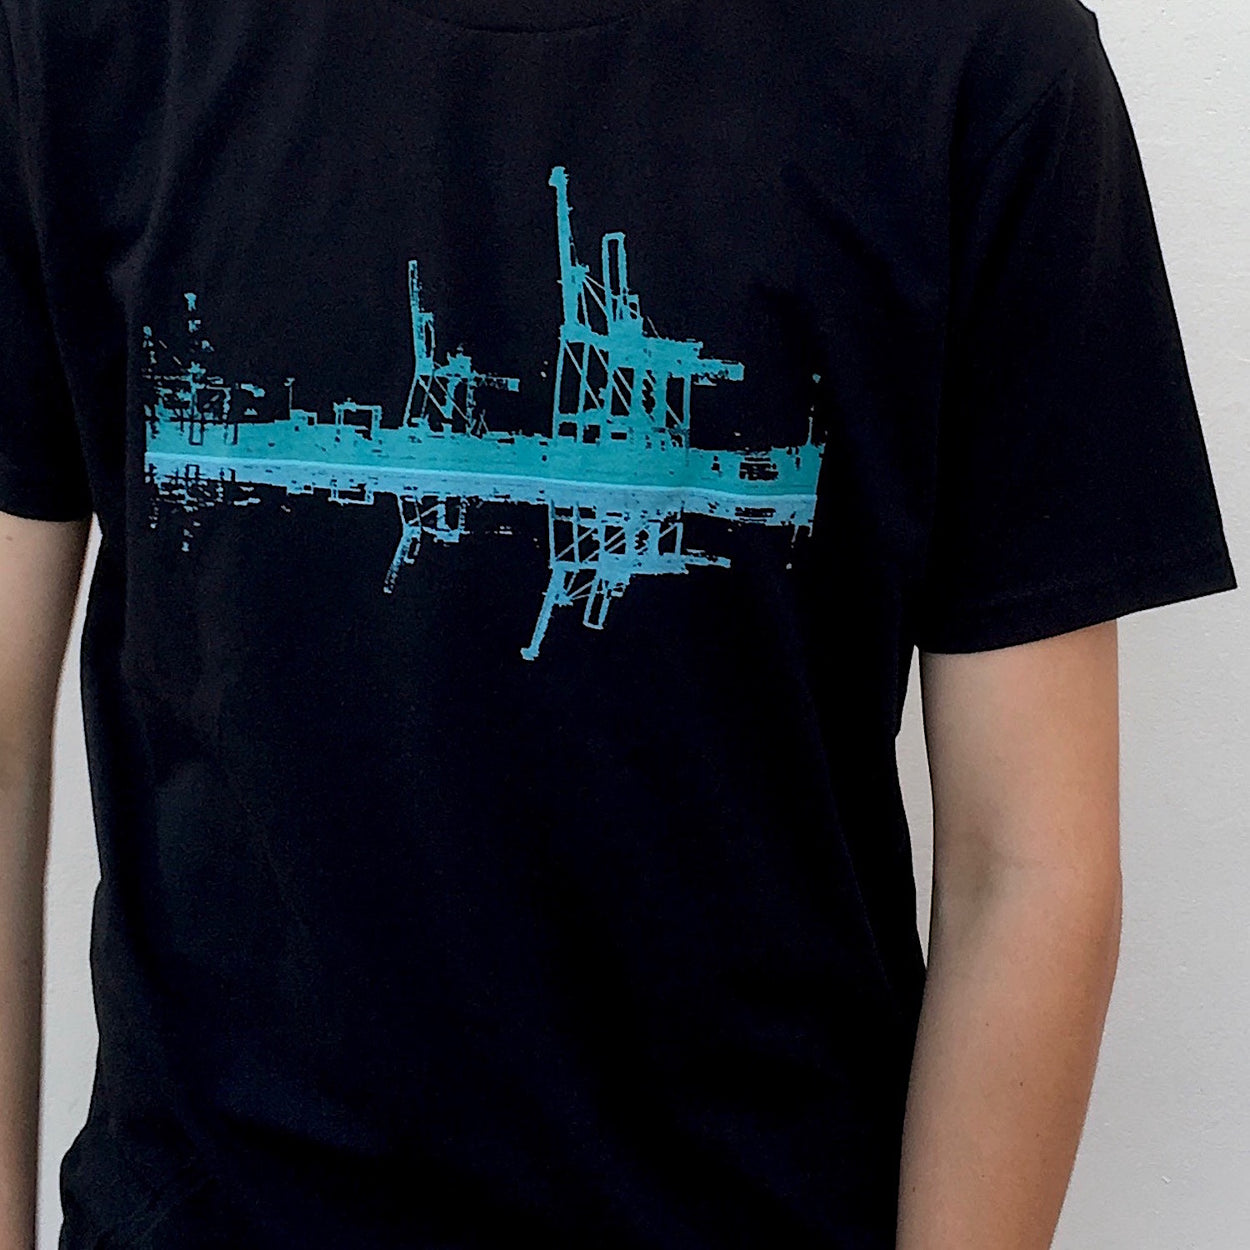 Photograph of screenprinted t-shirt depicting the container cranes at Fremantle Harbour.